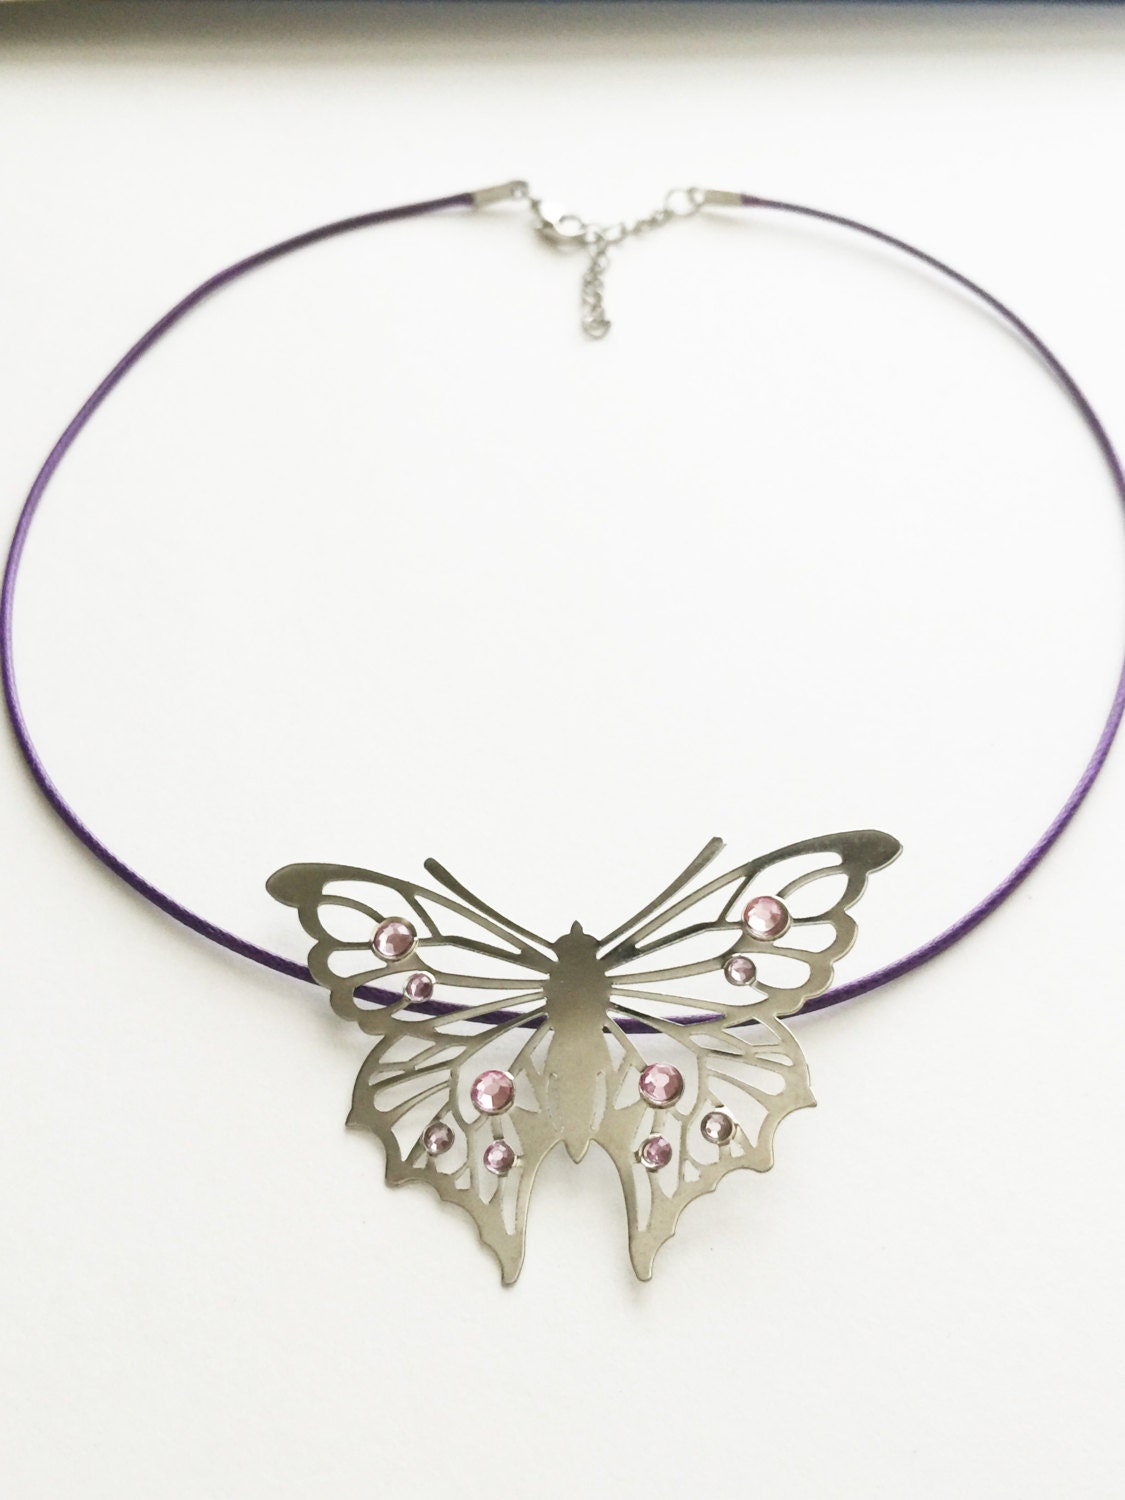 Necklace Large Butterfly Silver Tone With Pink Crystals on - Etsy